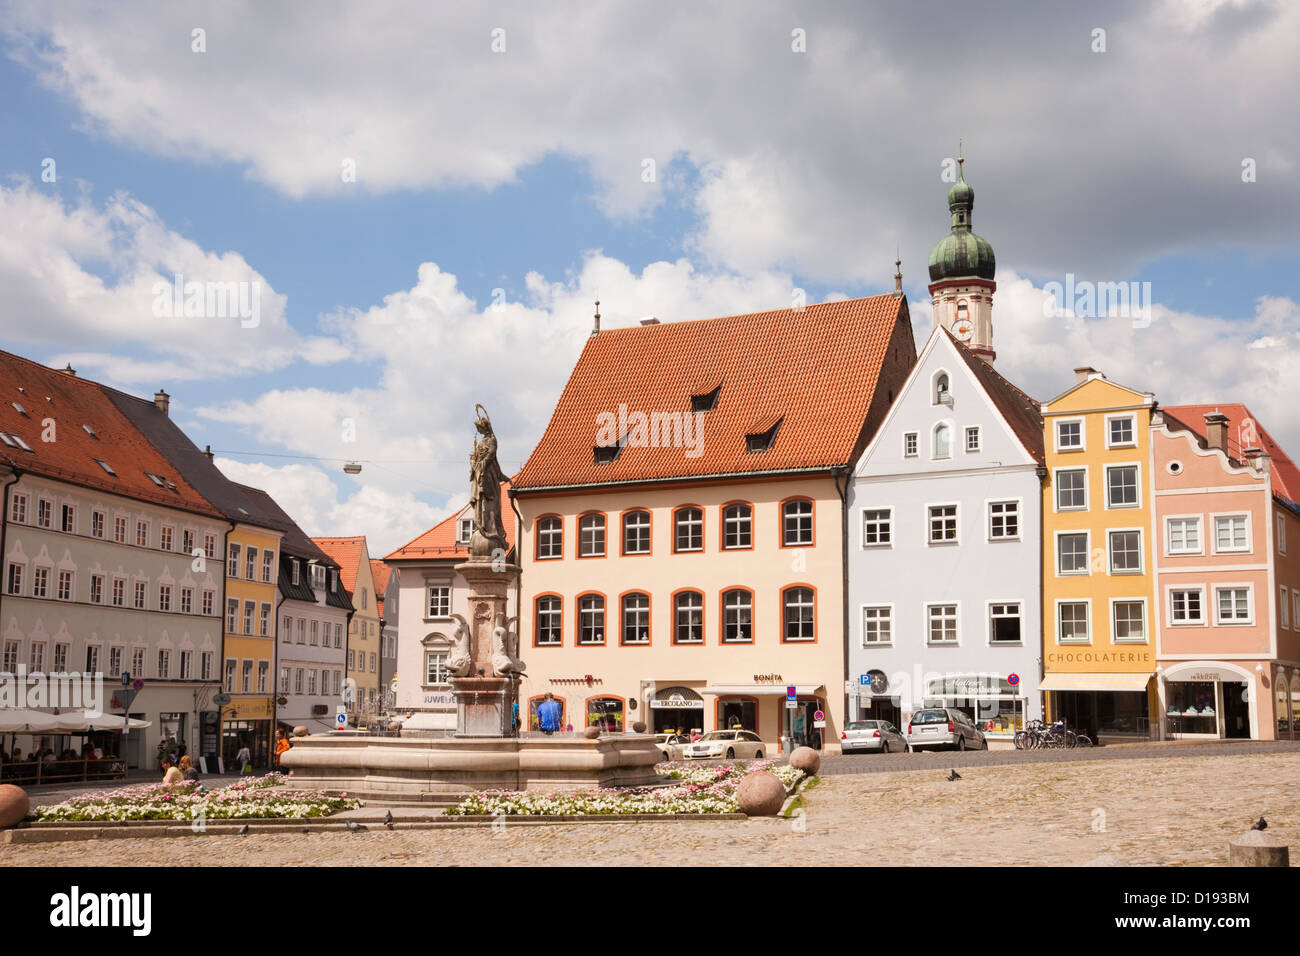 Hauptplatz, Landsberg am Lech, Bavaria, Germany. Fountain and old buildings in historic altstadt of walled town on Romantic Road Stock Photo